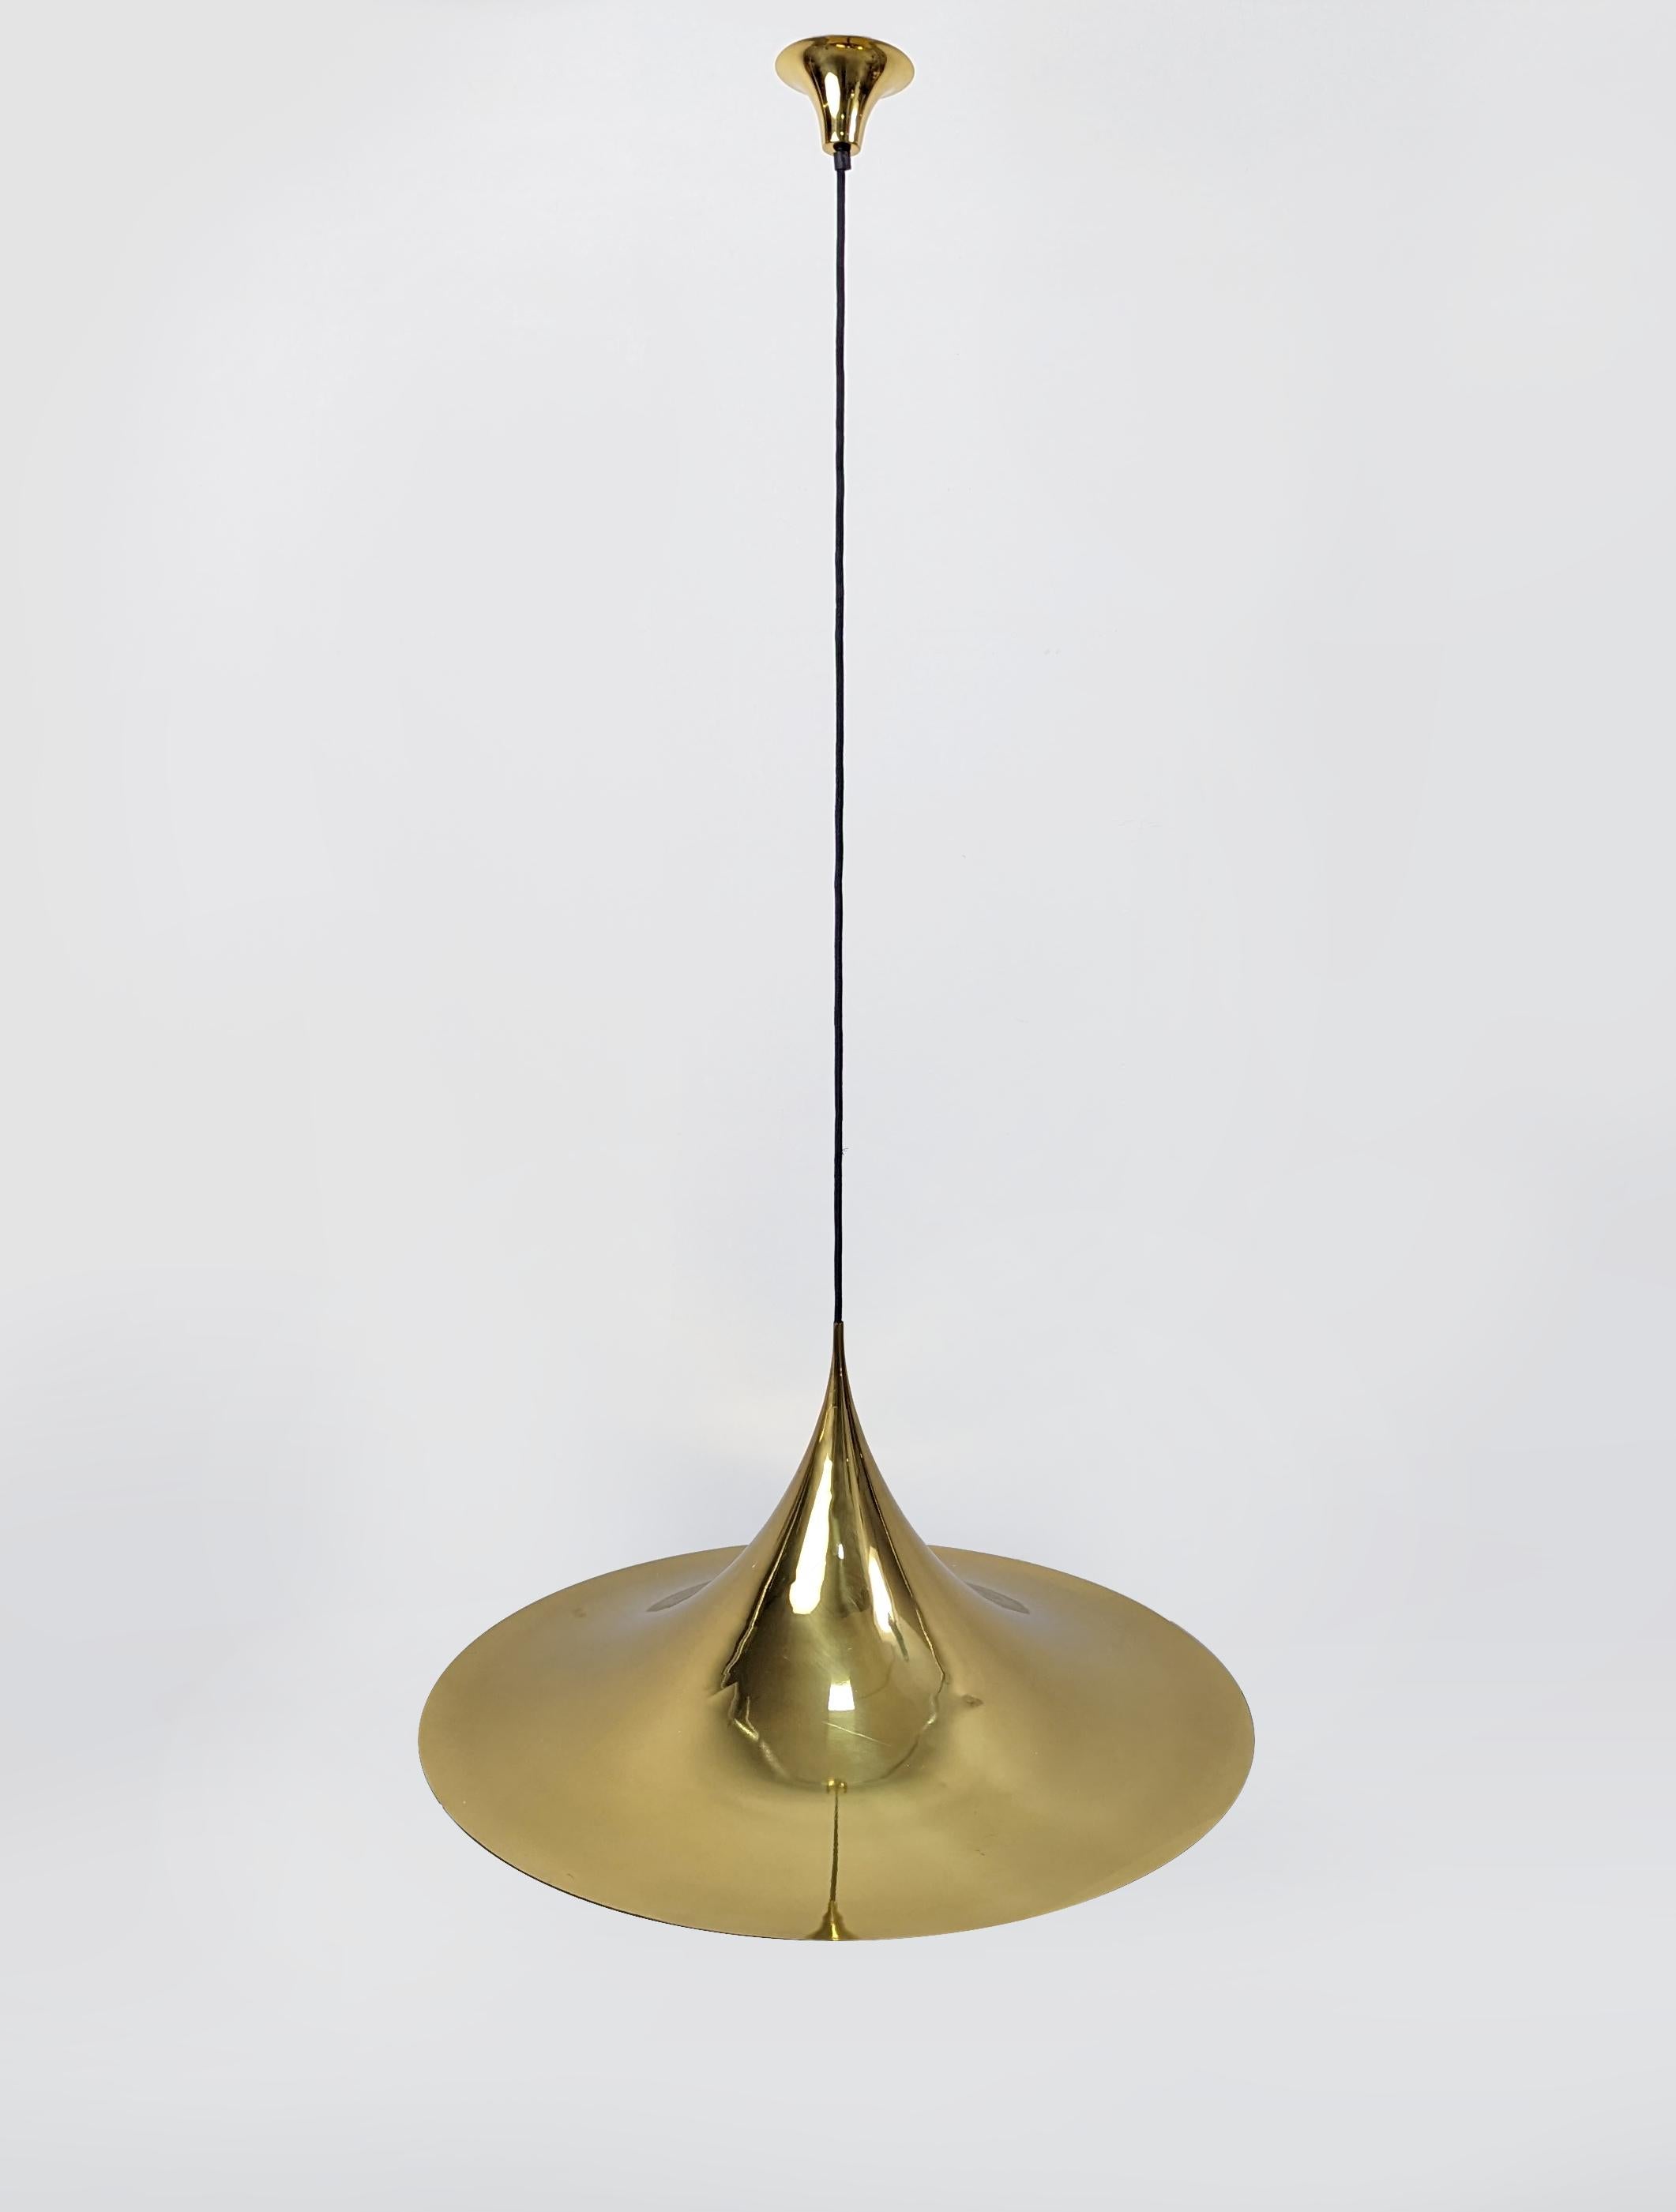 Large Semi Pendant Lamp Brass by Fog & Morup, 1970s For Sale 3